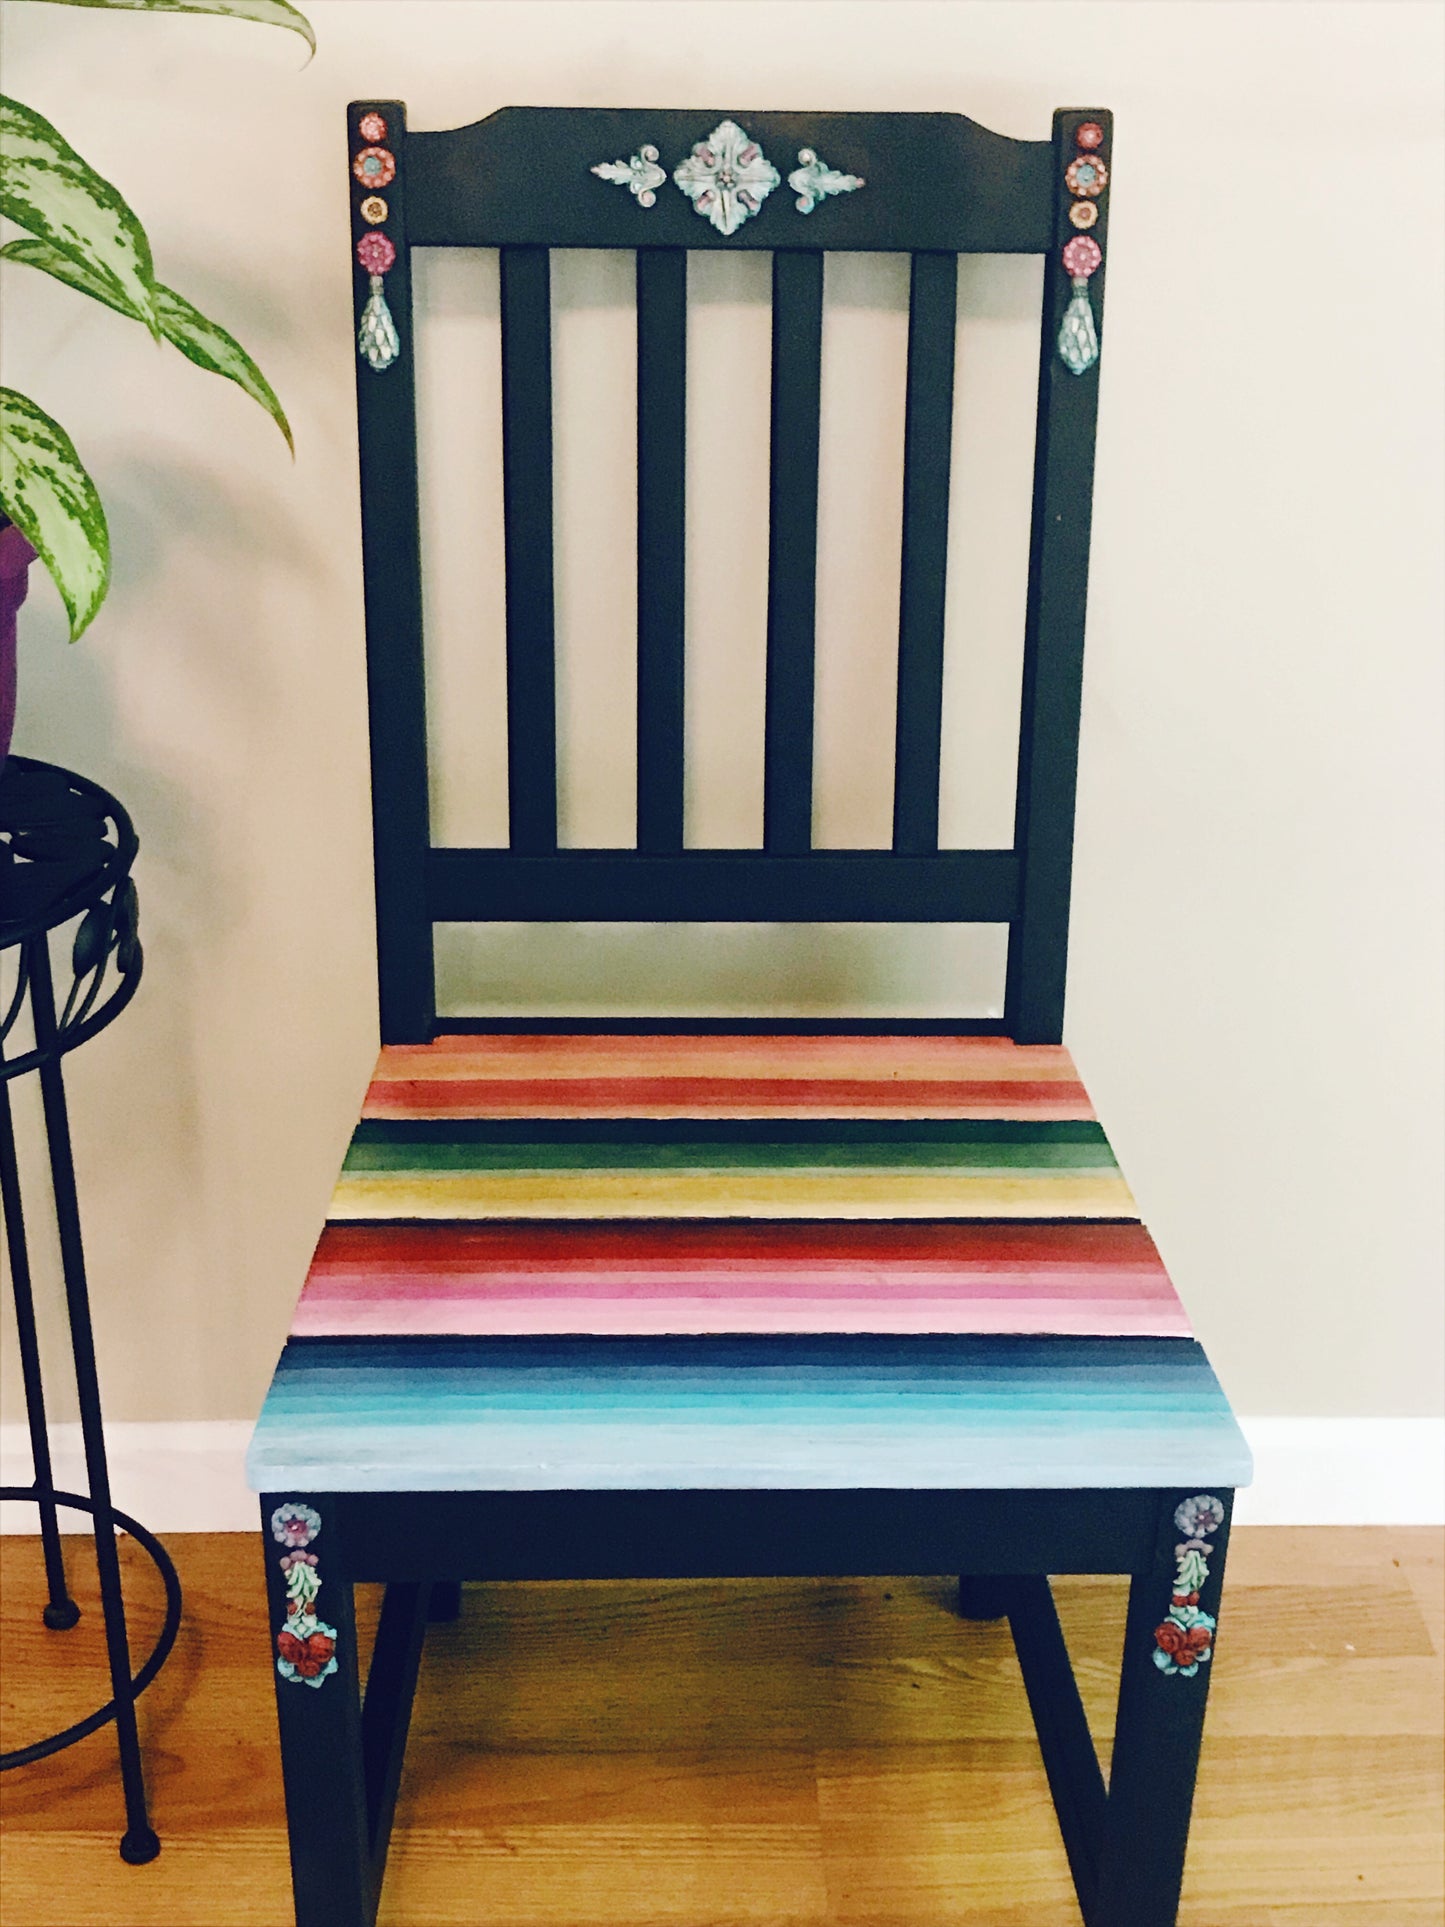 Mexican Serape Accent Chair - hand painted - floral - bohemian - furniture art - pink - blue